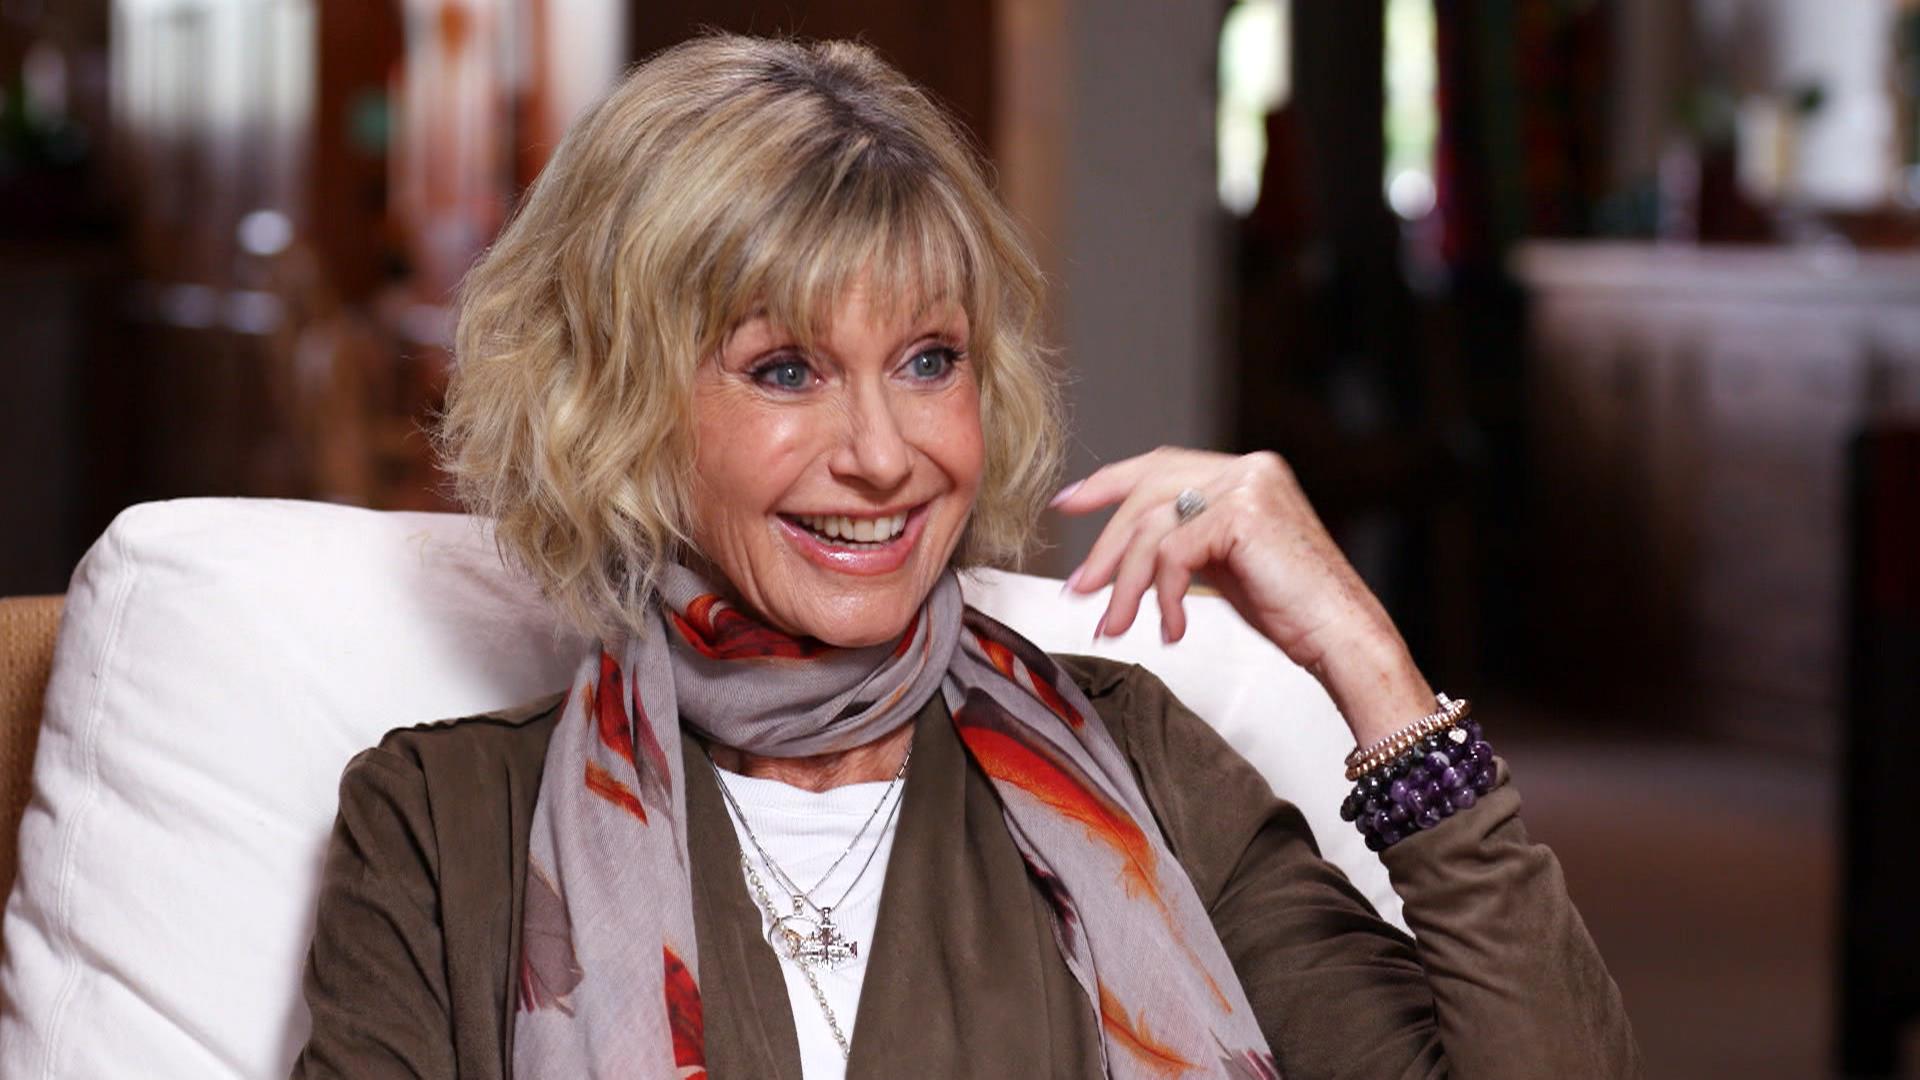 Olivia Newton-John opens up about memoir, 'Grease' and more.